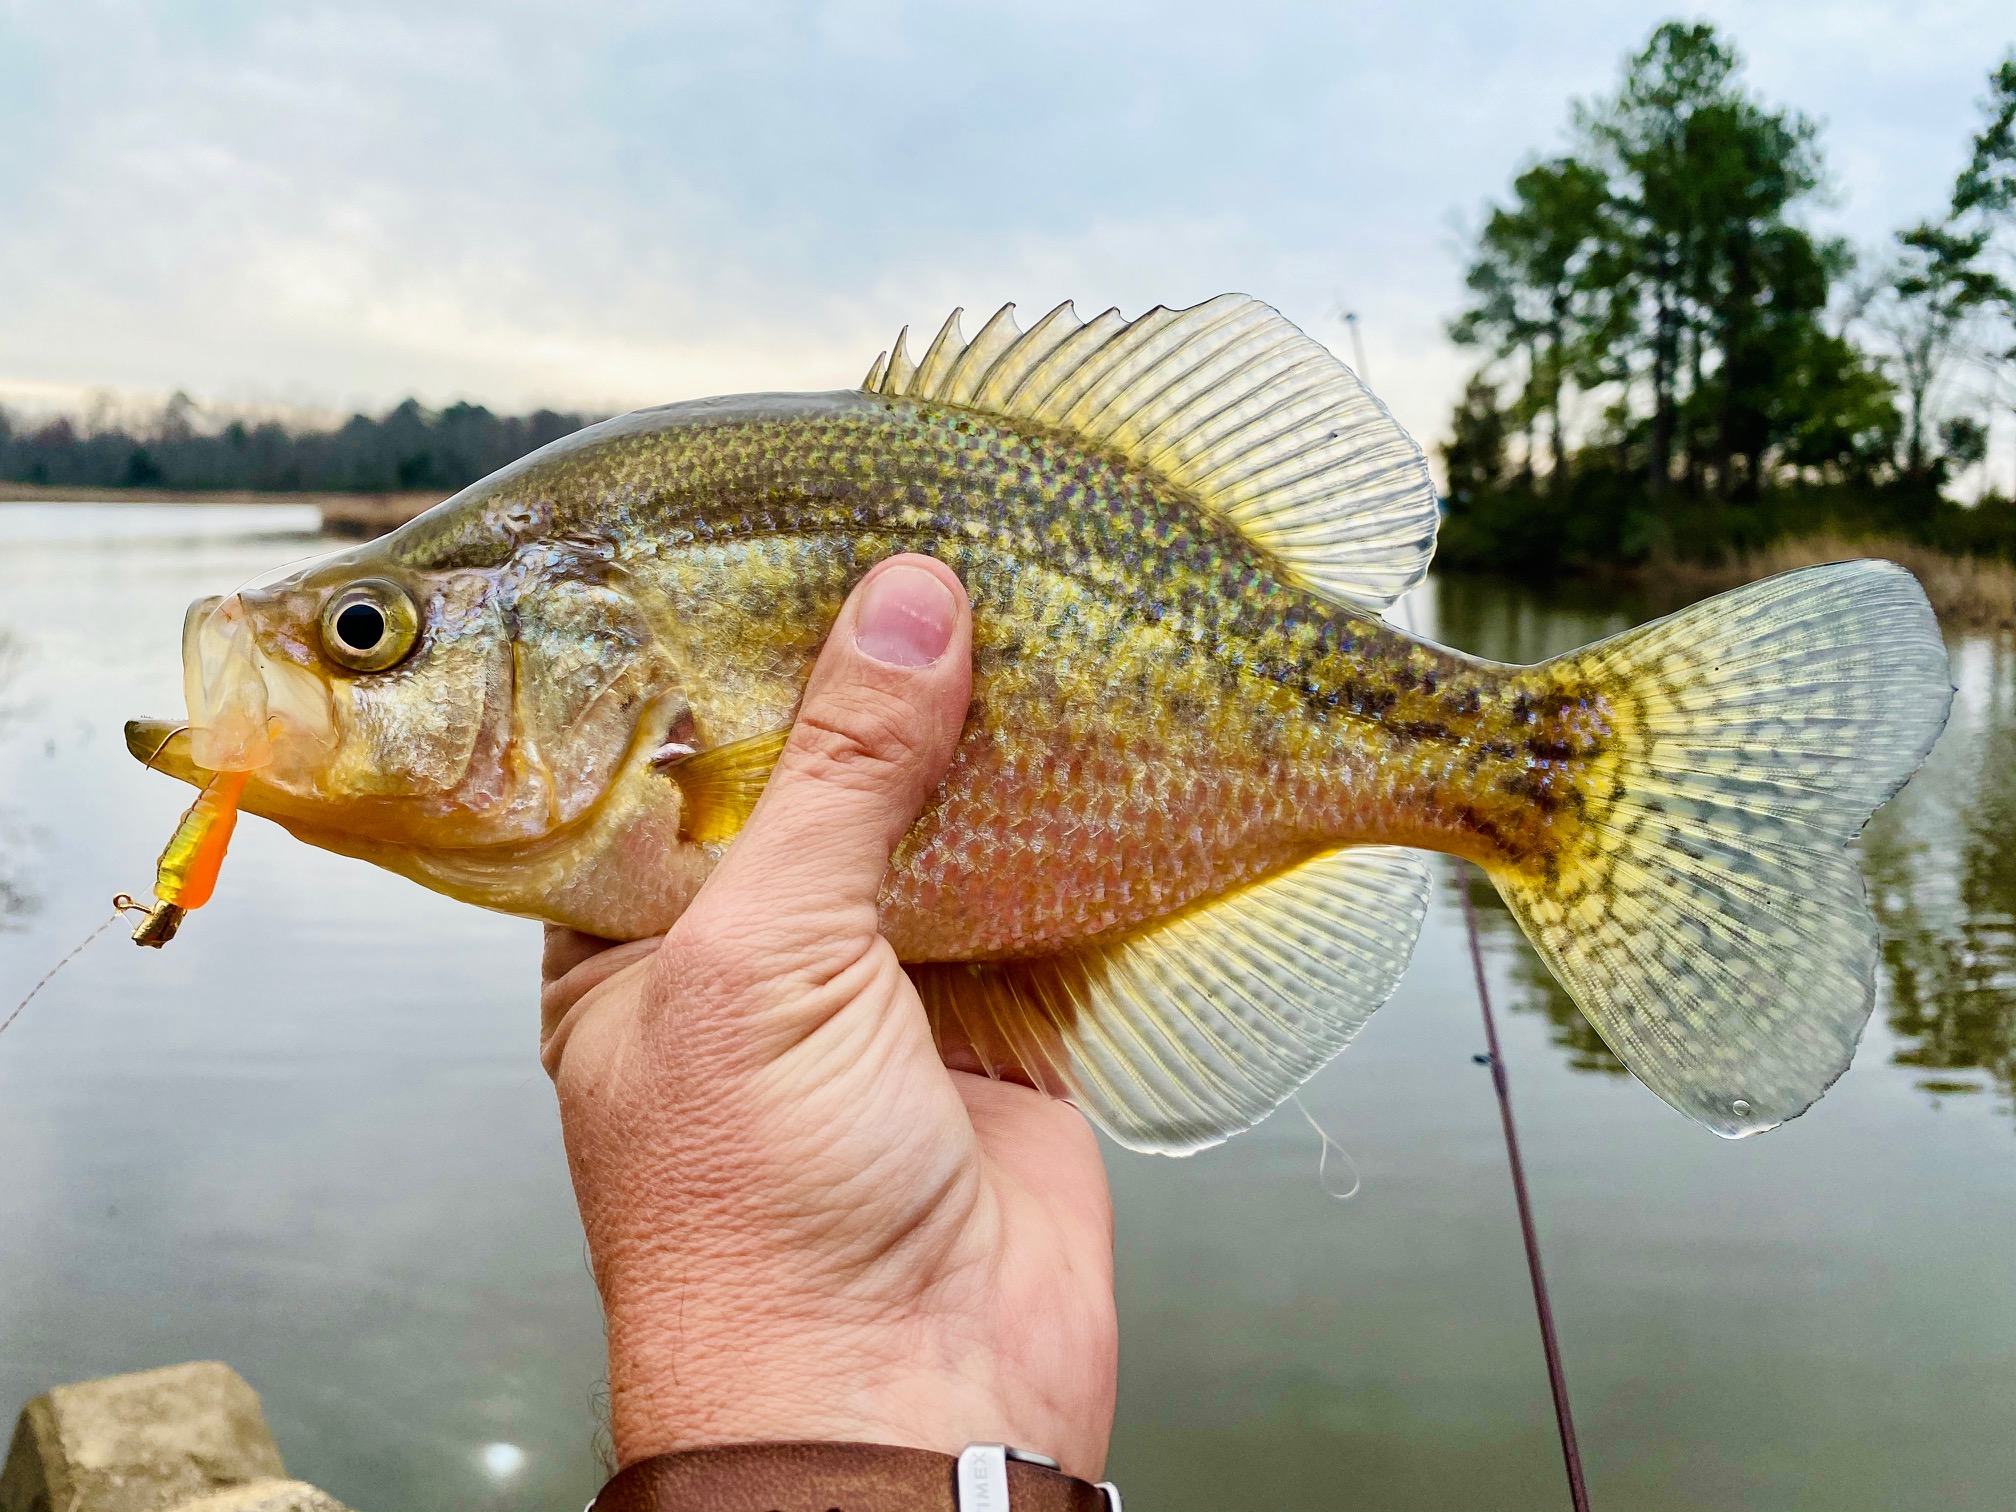 Spring is coming, and so are the panfish